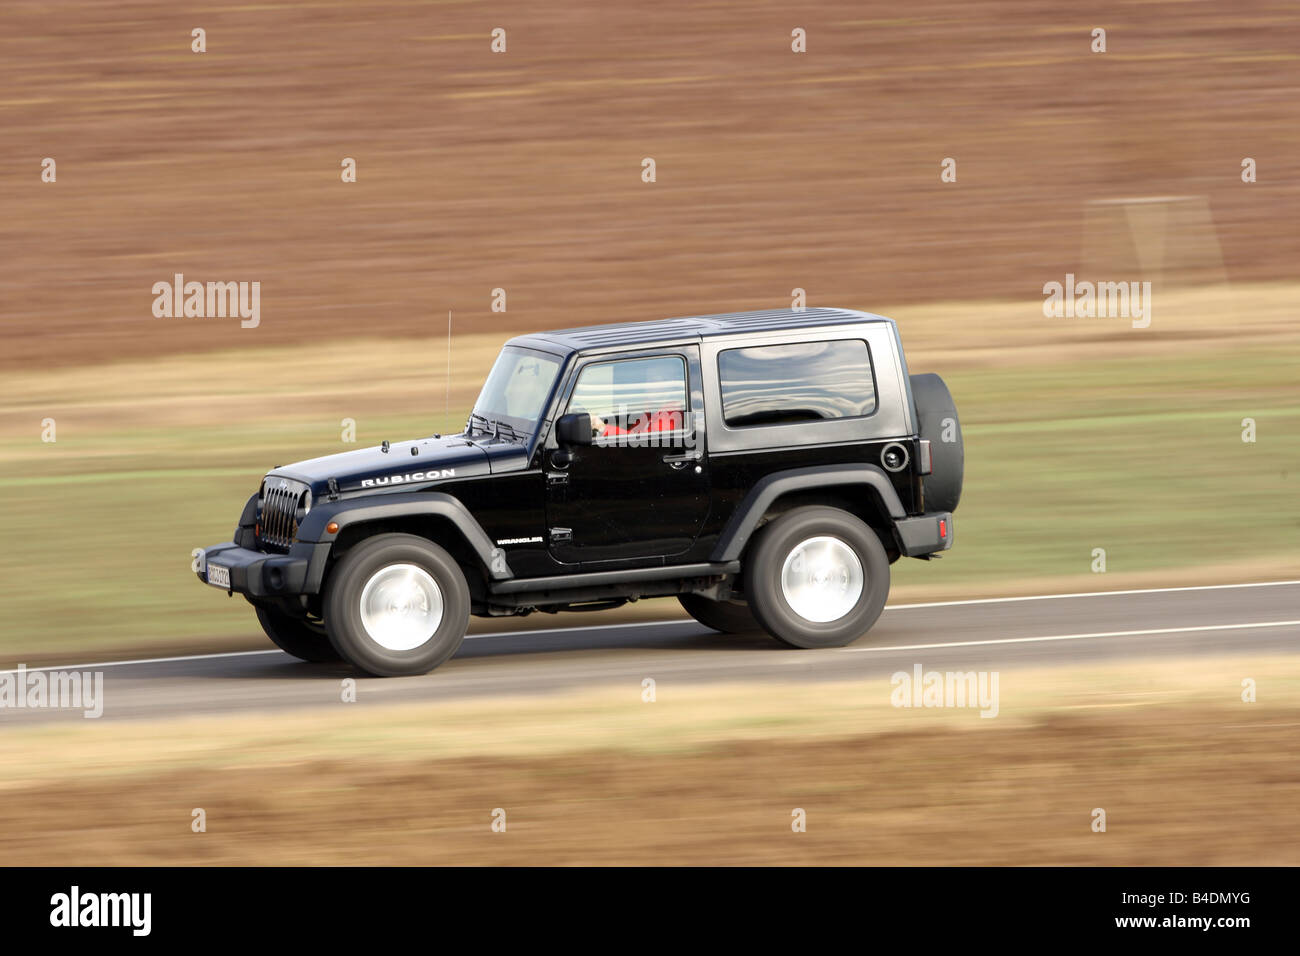 Jeep Wrangler Rubicon 3.8, model year 2008-, black, driving, side view, country road Stock Photo